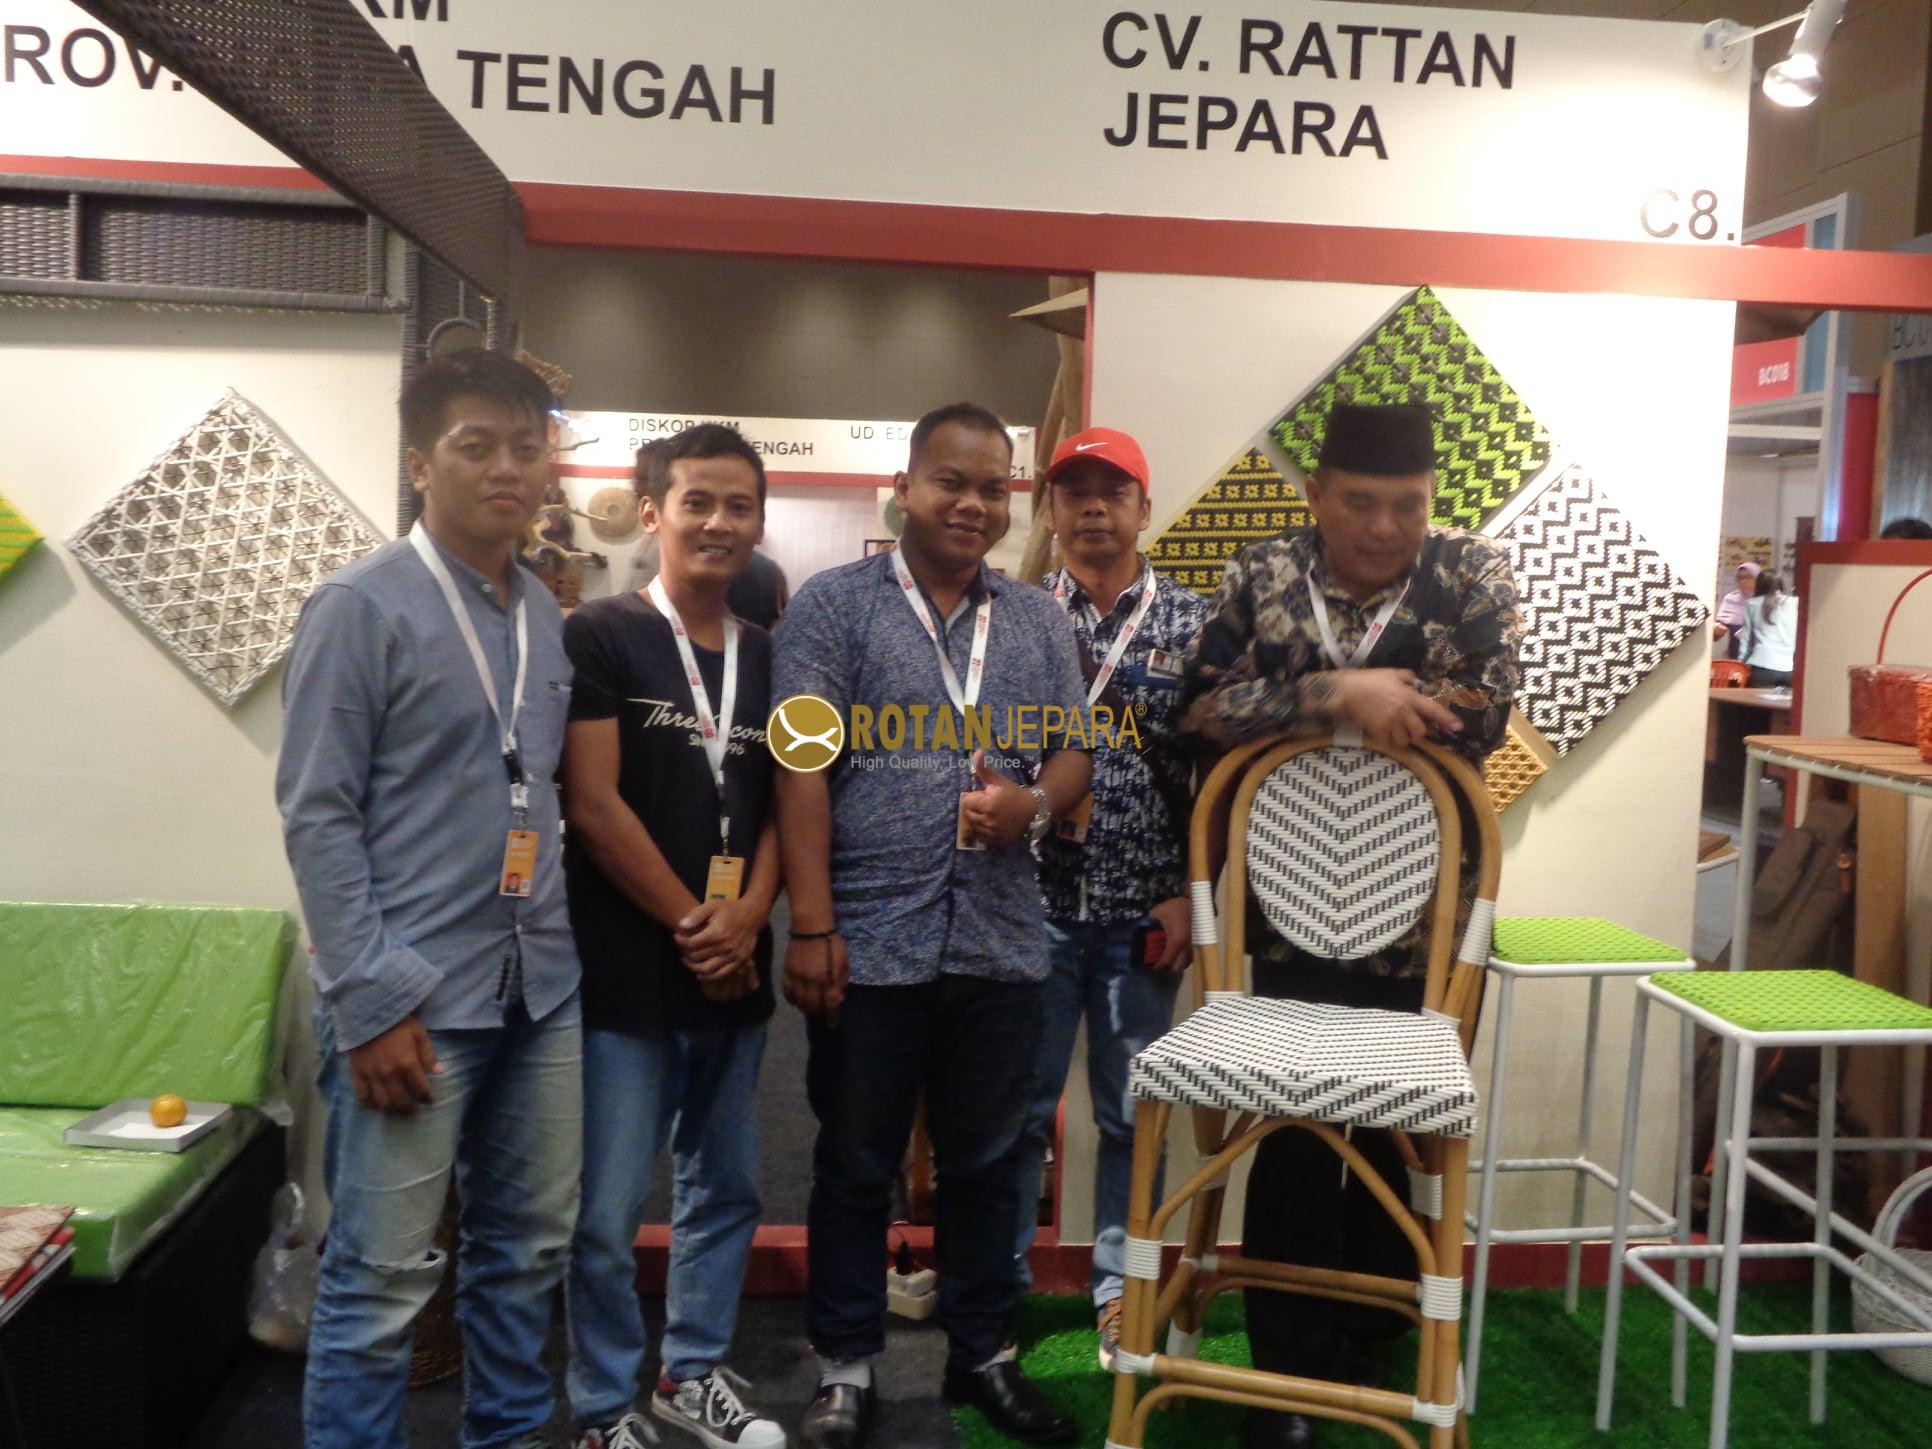 One of the largest international trade exhibitions in South East Asia for the furniture and craft industries